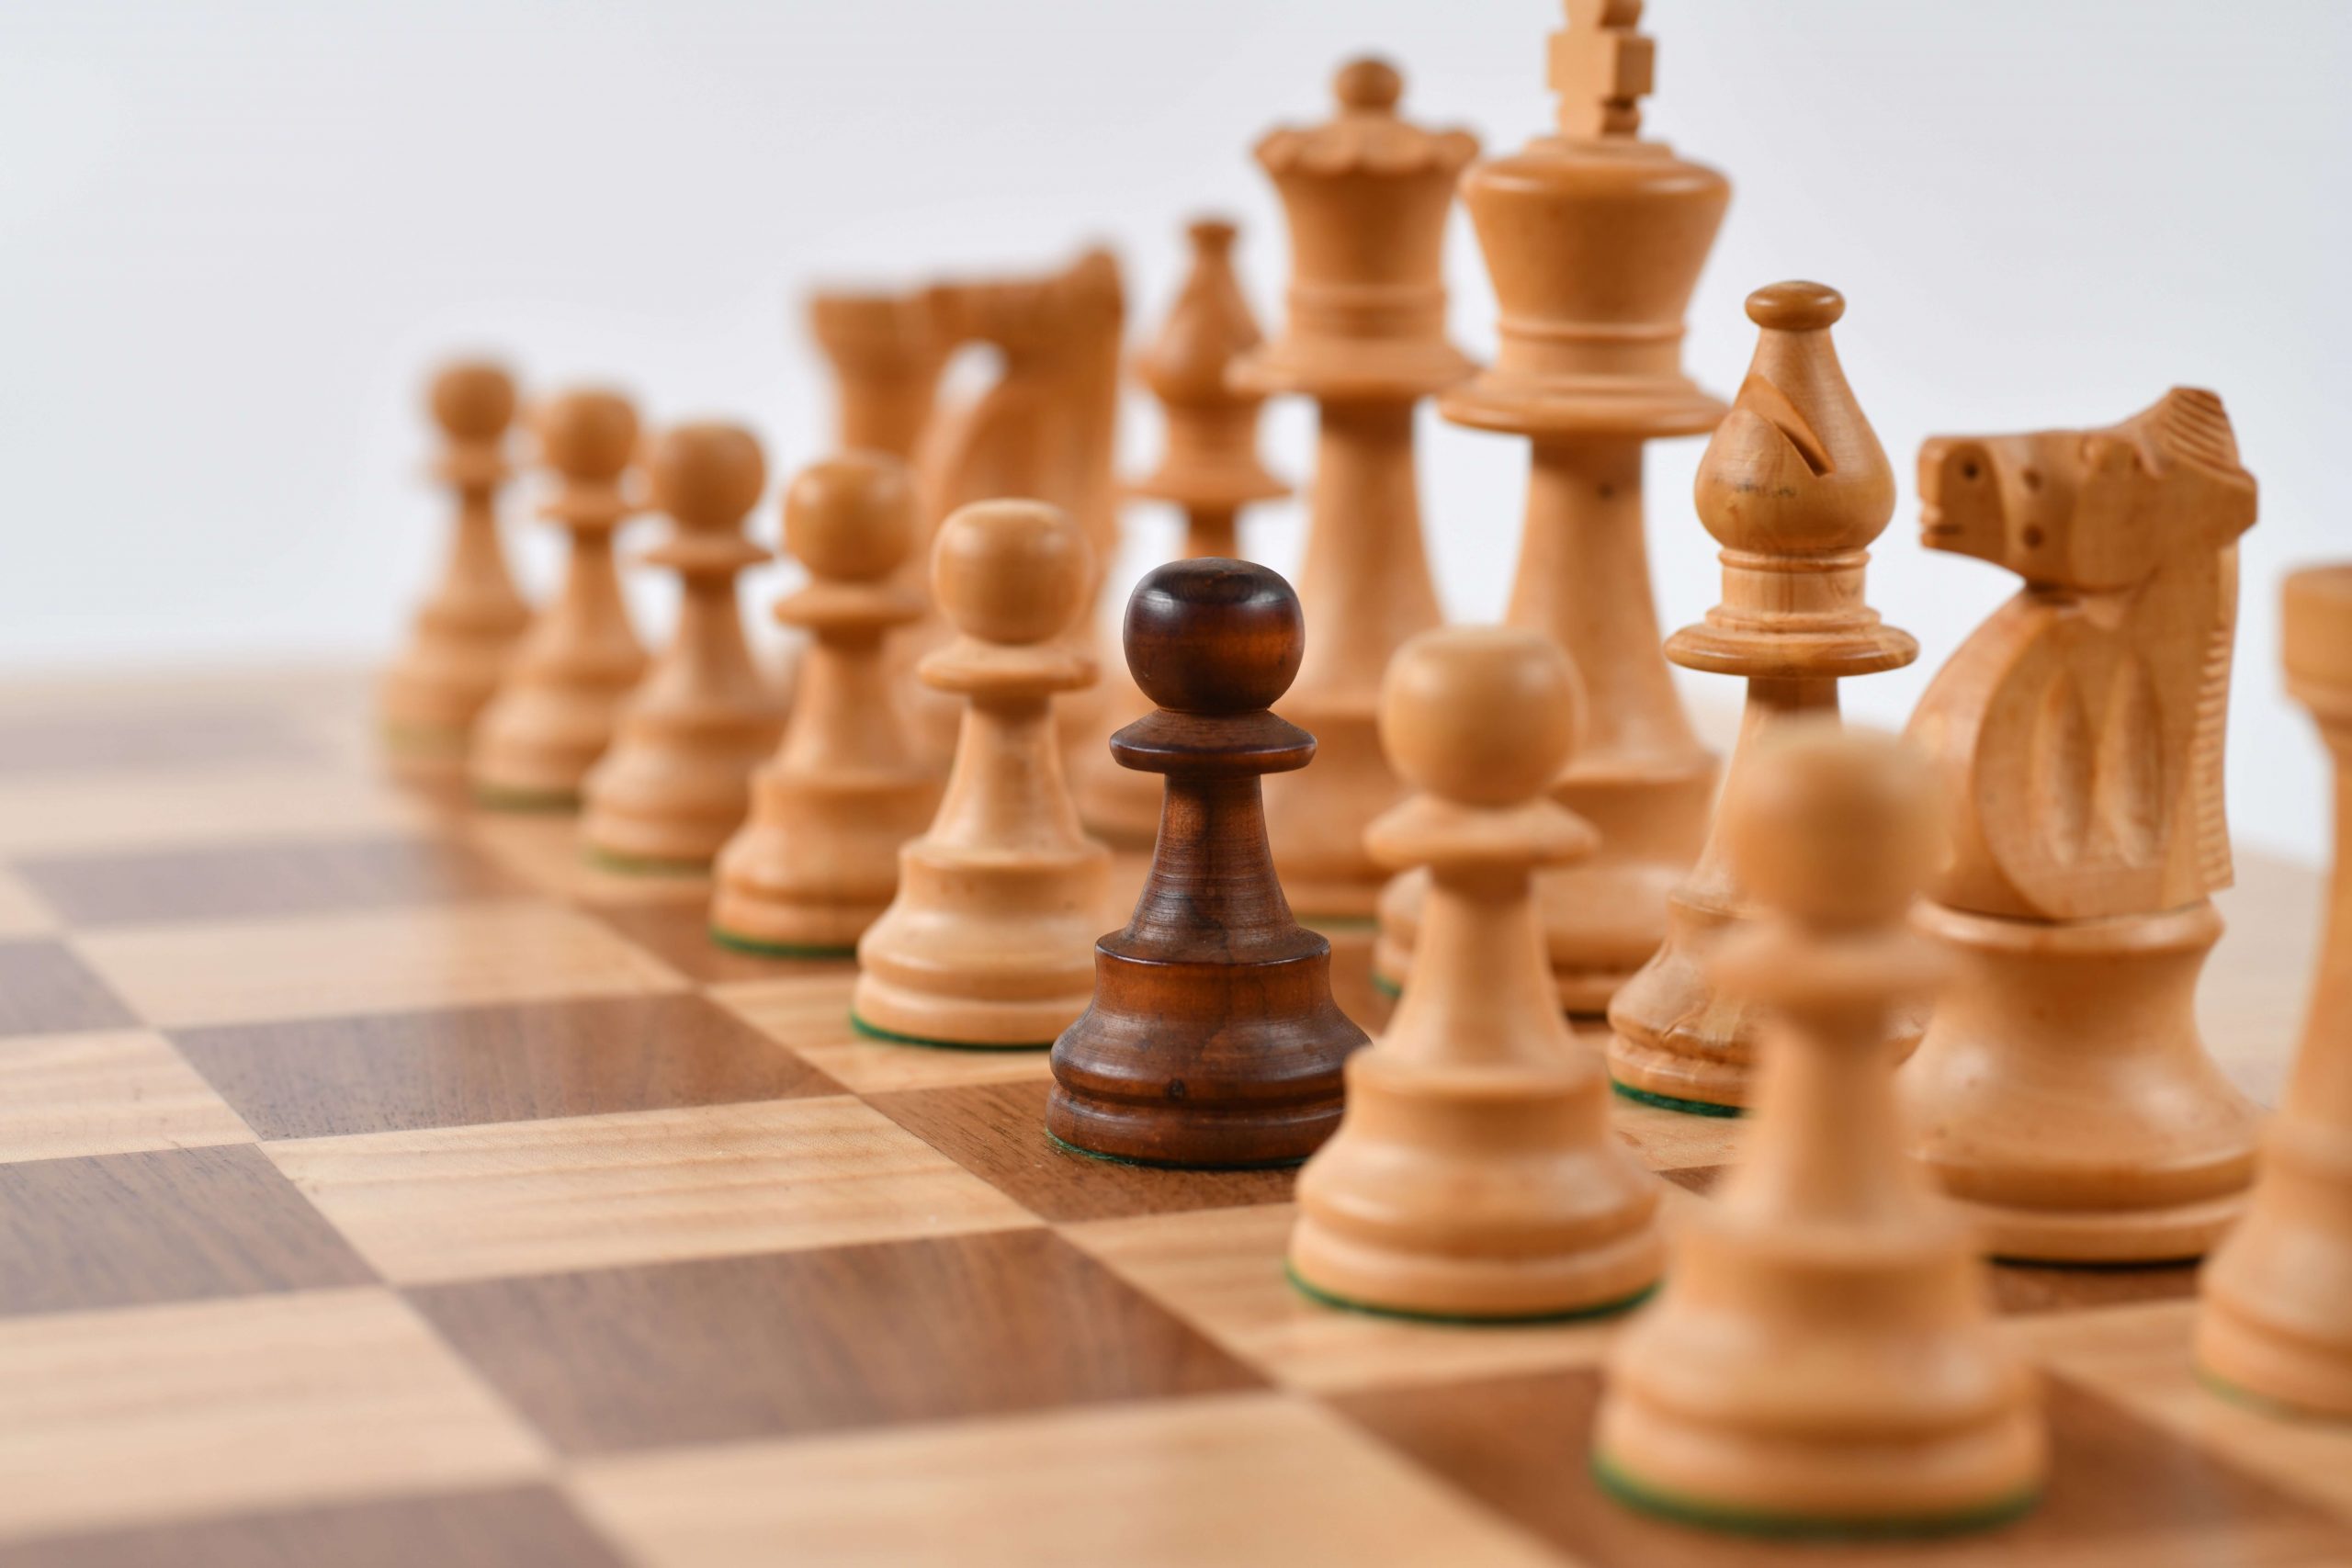 Ready to be a chess master? These training sessions can boost your